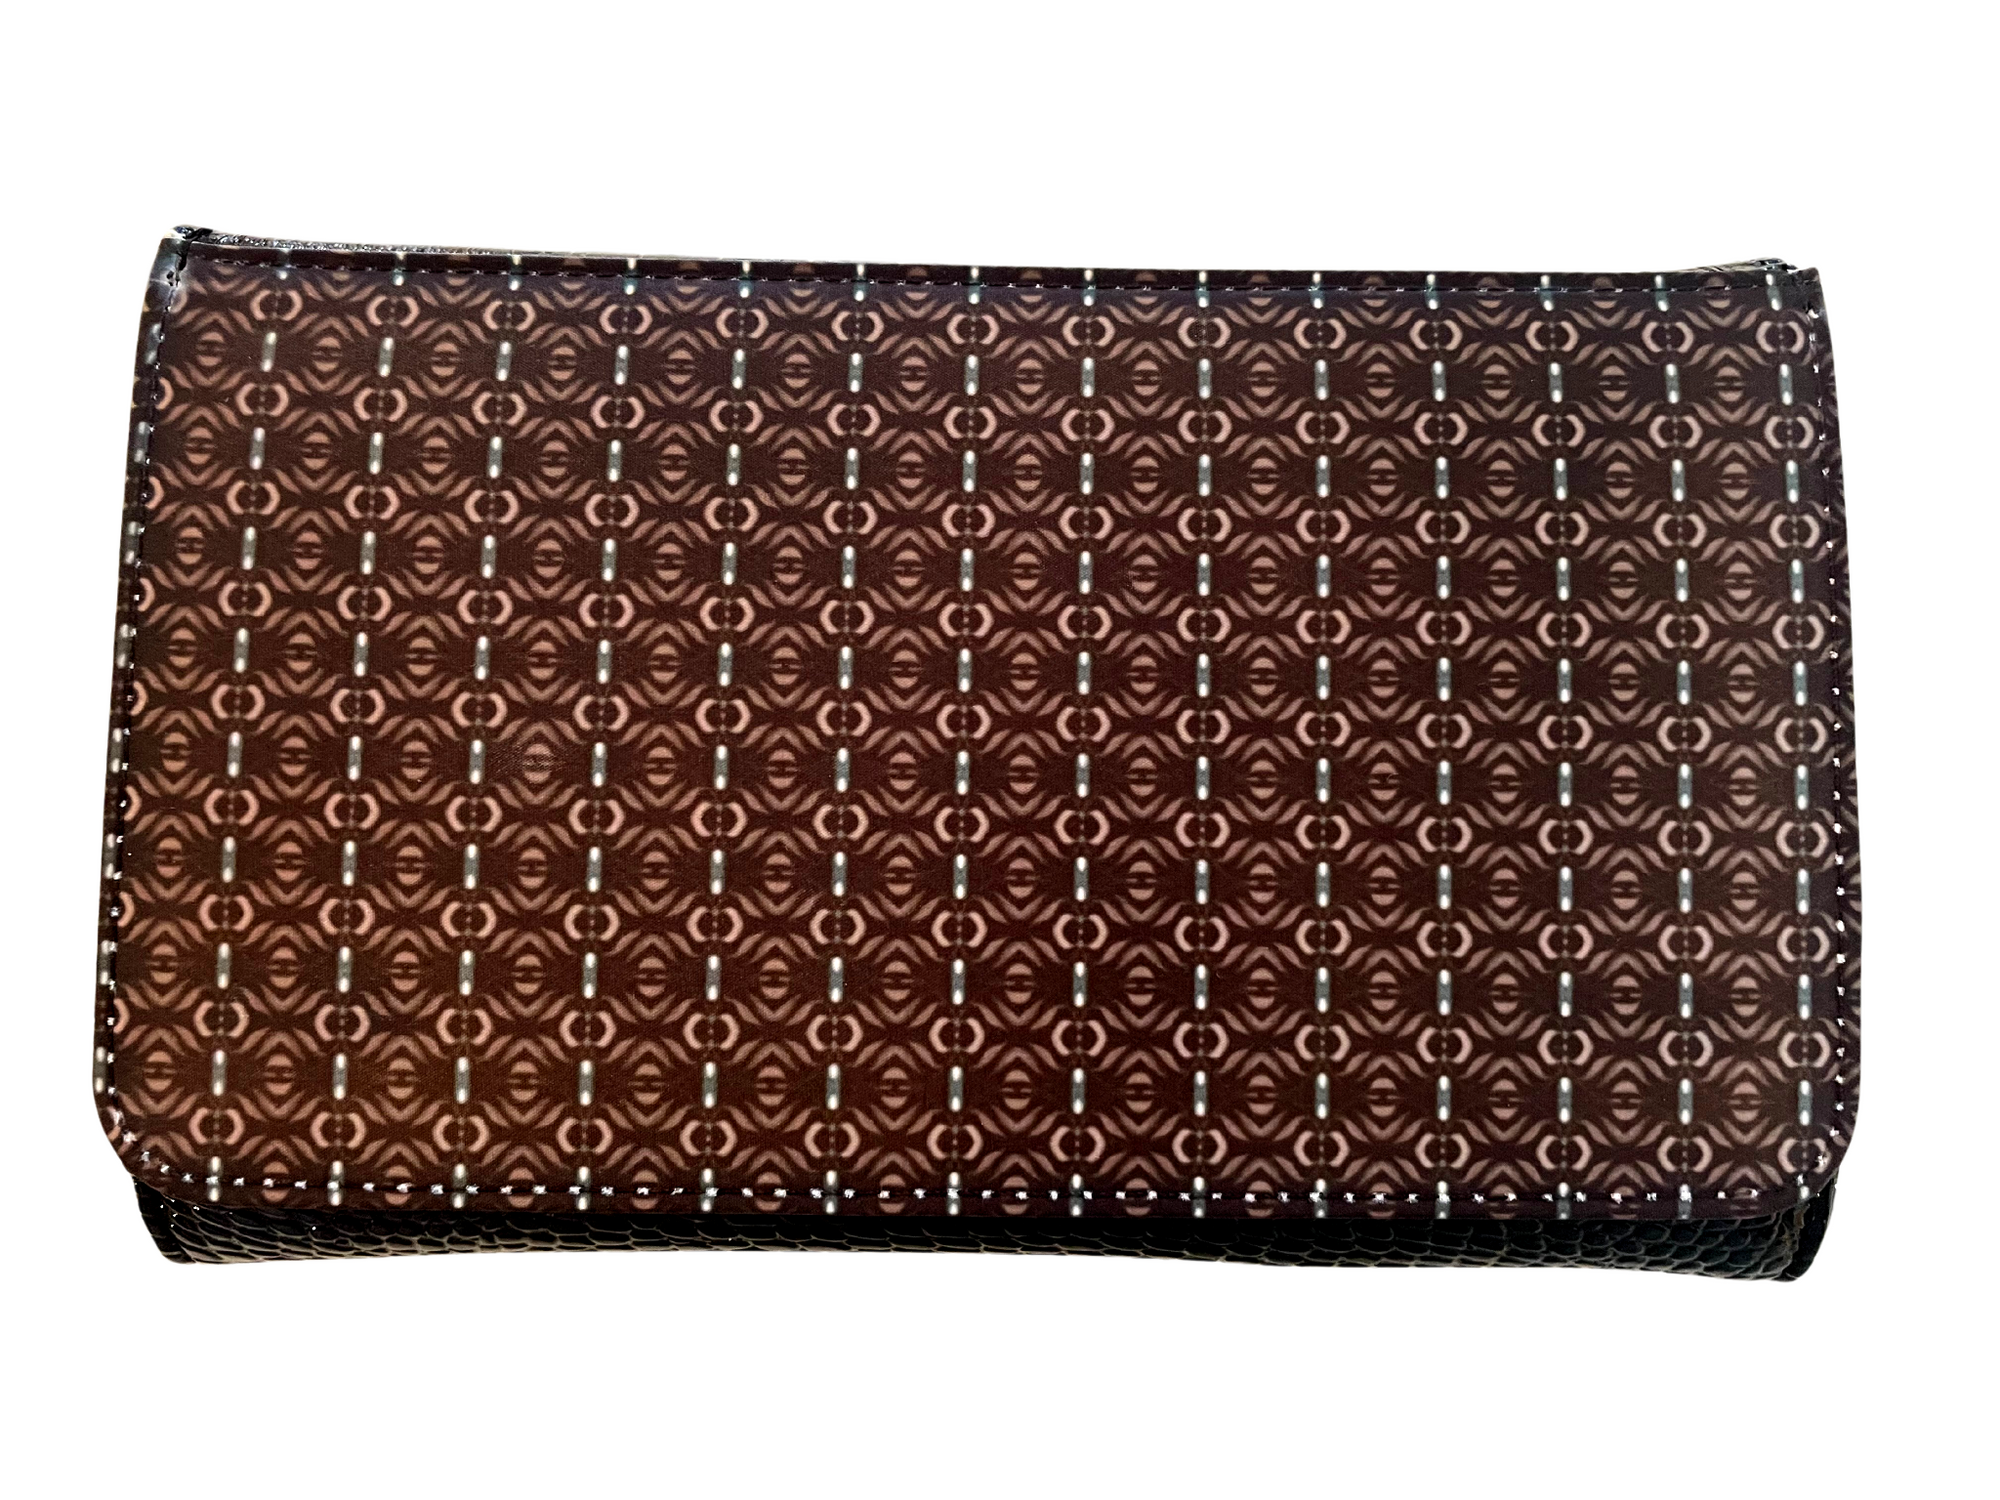 *Evening bag with black and brown print